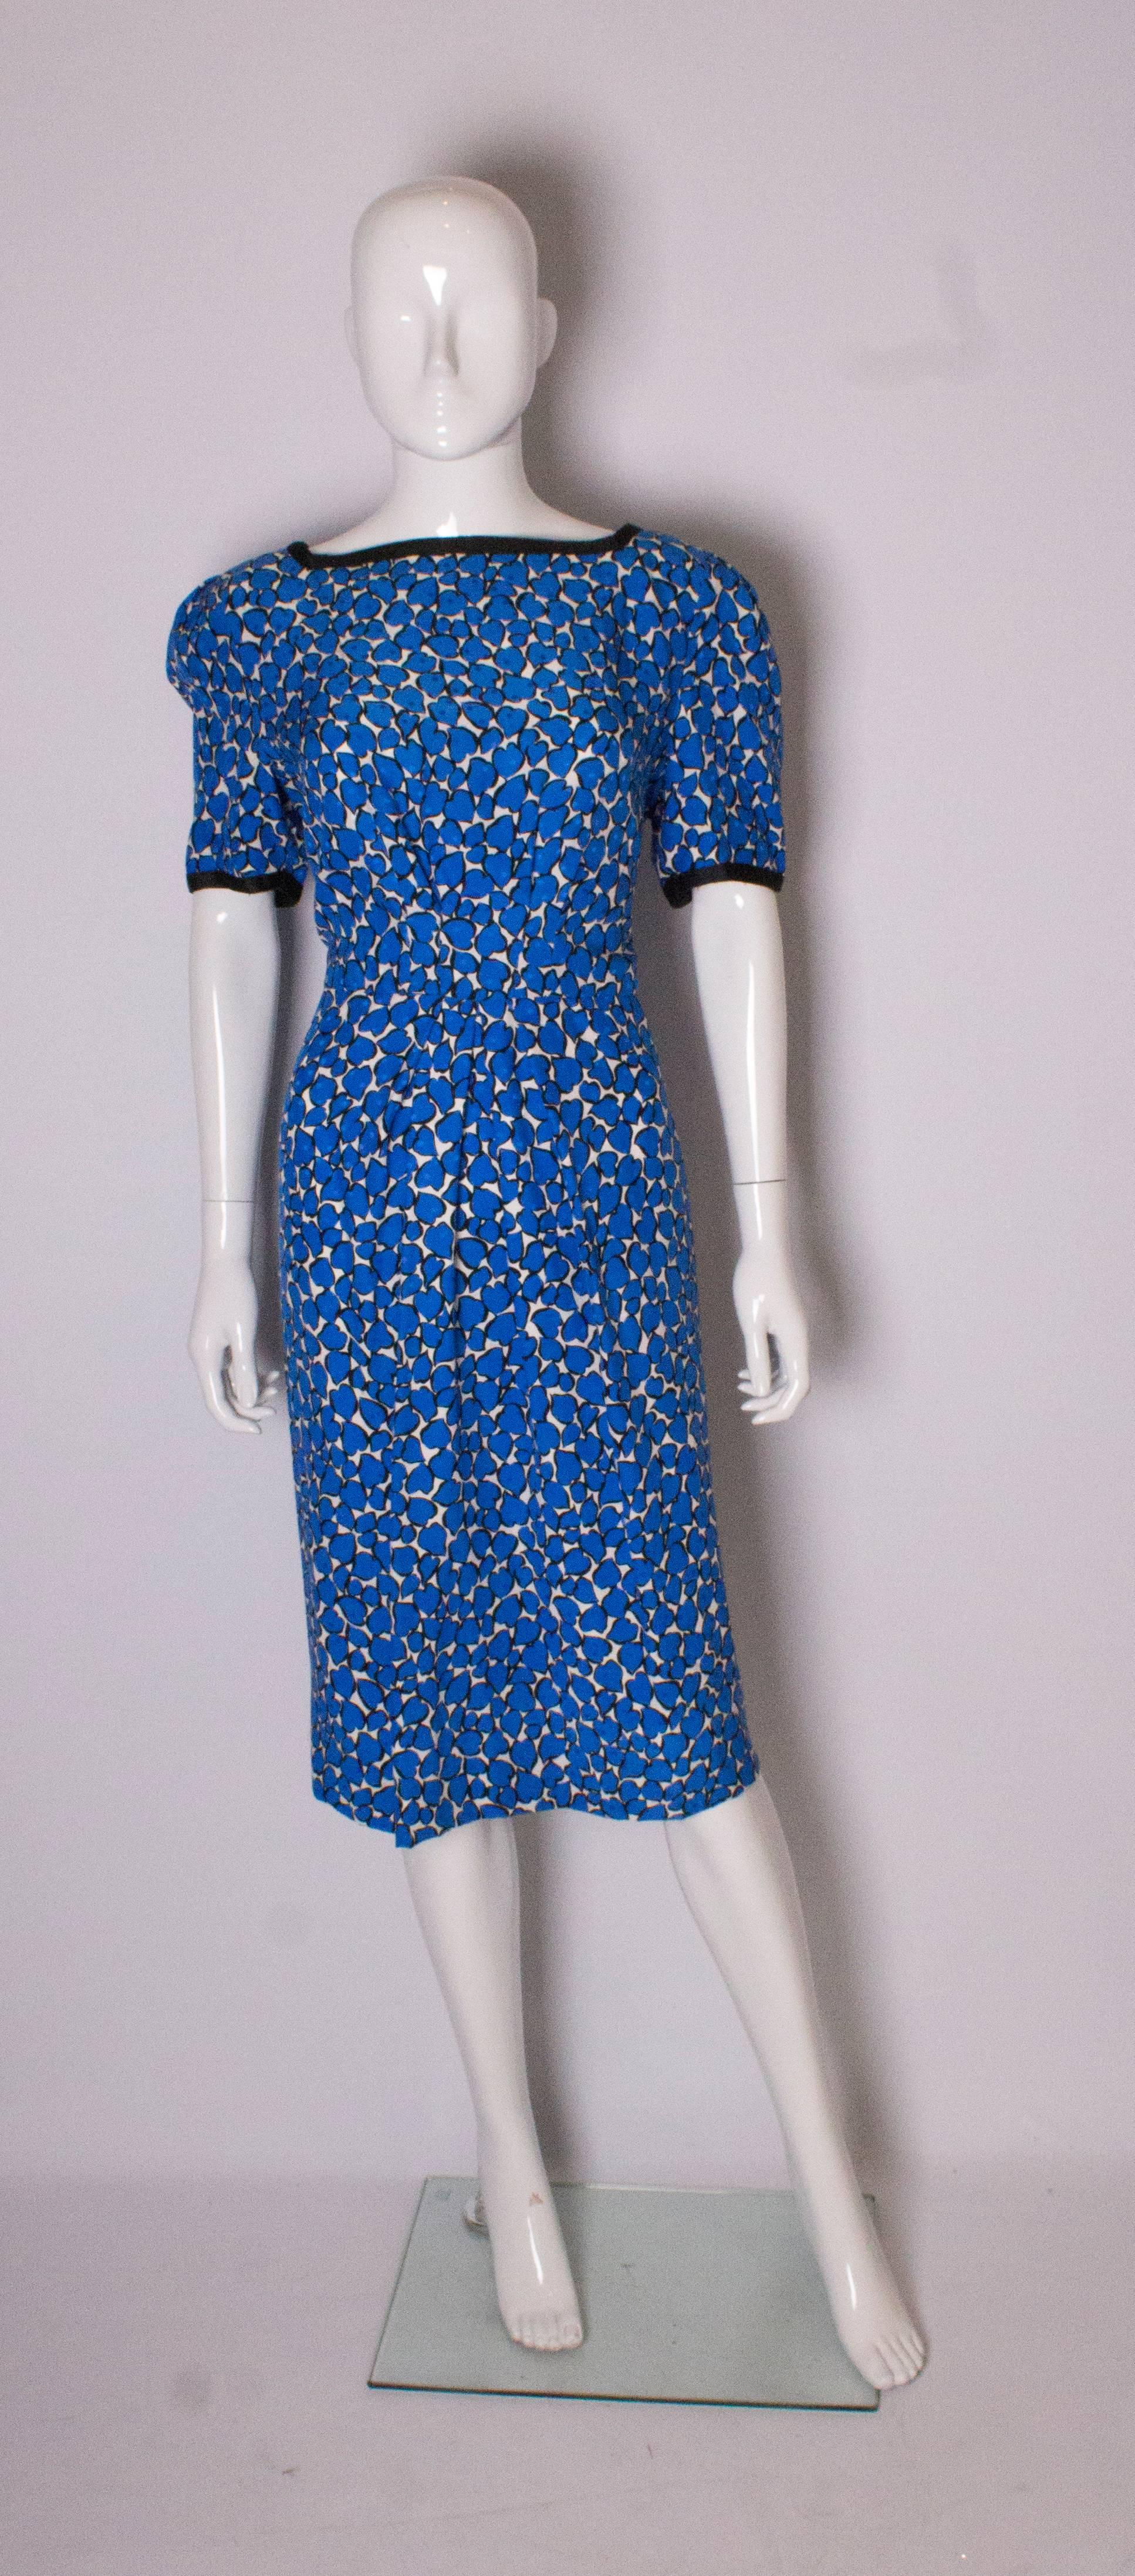 A chic dress by British designer Donald Campbell, in a blue and white silk designed by Abraham of Switzerland. The dress has a black band around the neck and cuffs, a central back zip and is fully lined.